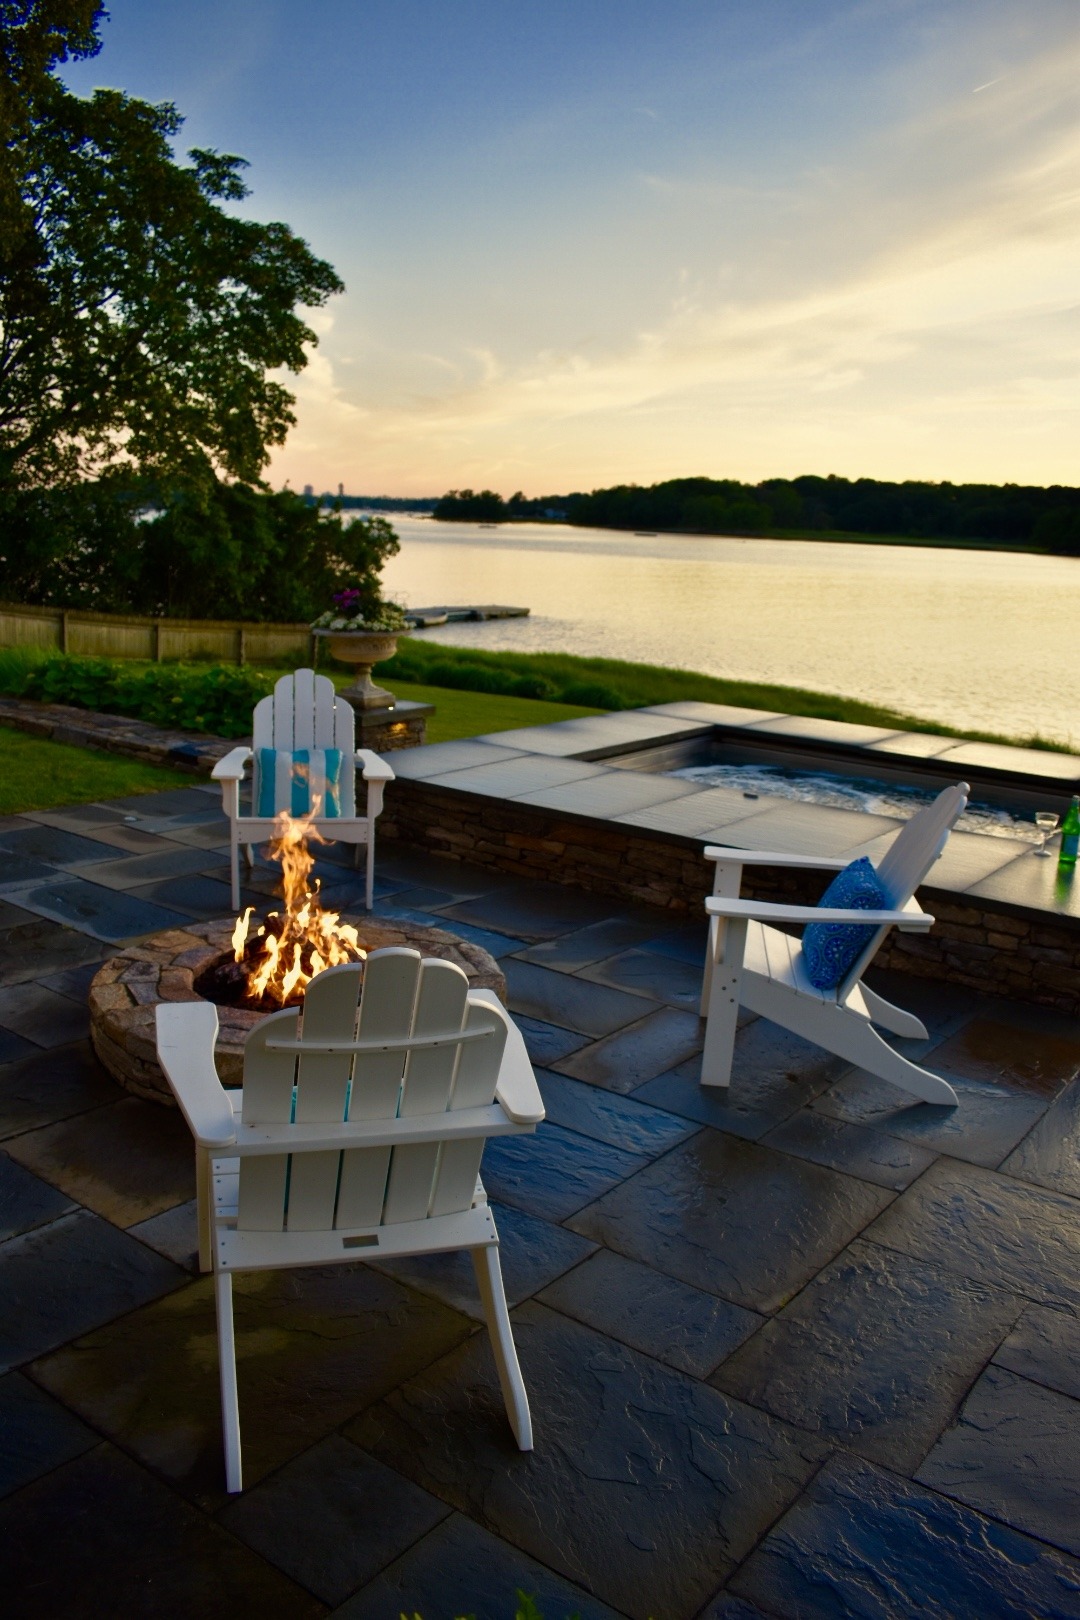 A serene outdoor setting with Adirondack chairs, a fire pit, overlooking a calm river during sunset, creating a tranquil and inviting atmosphere.